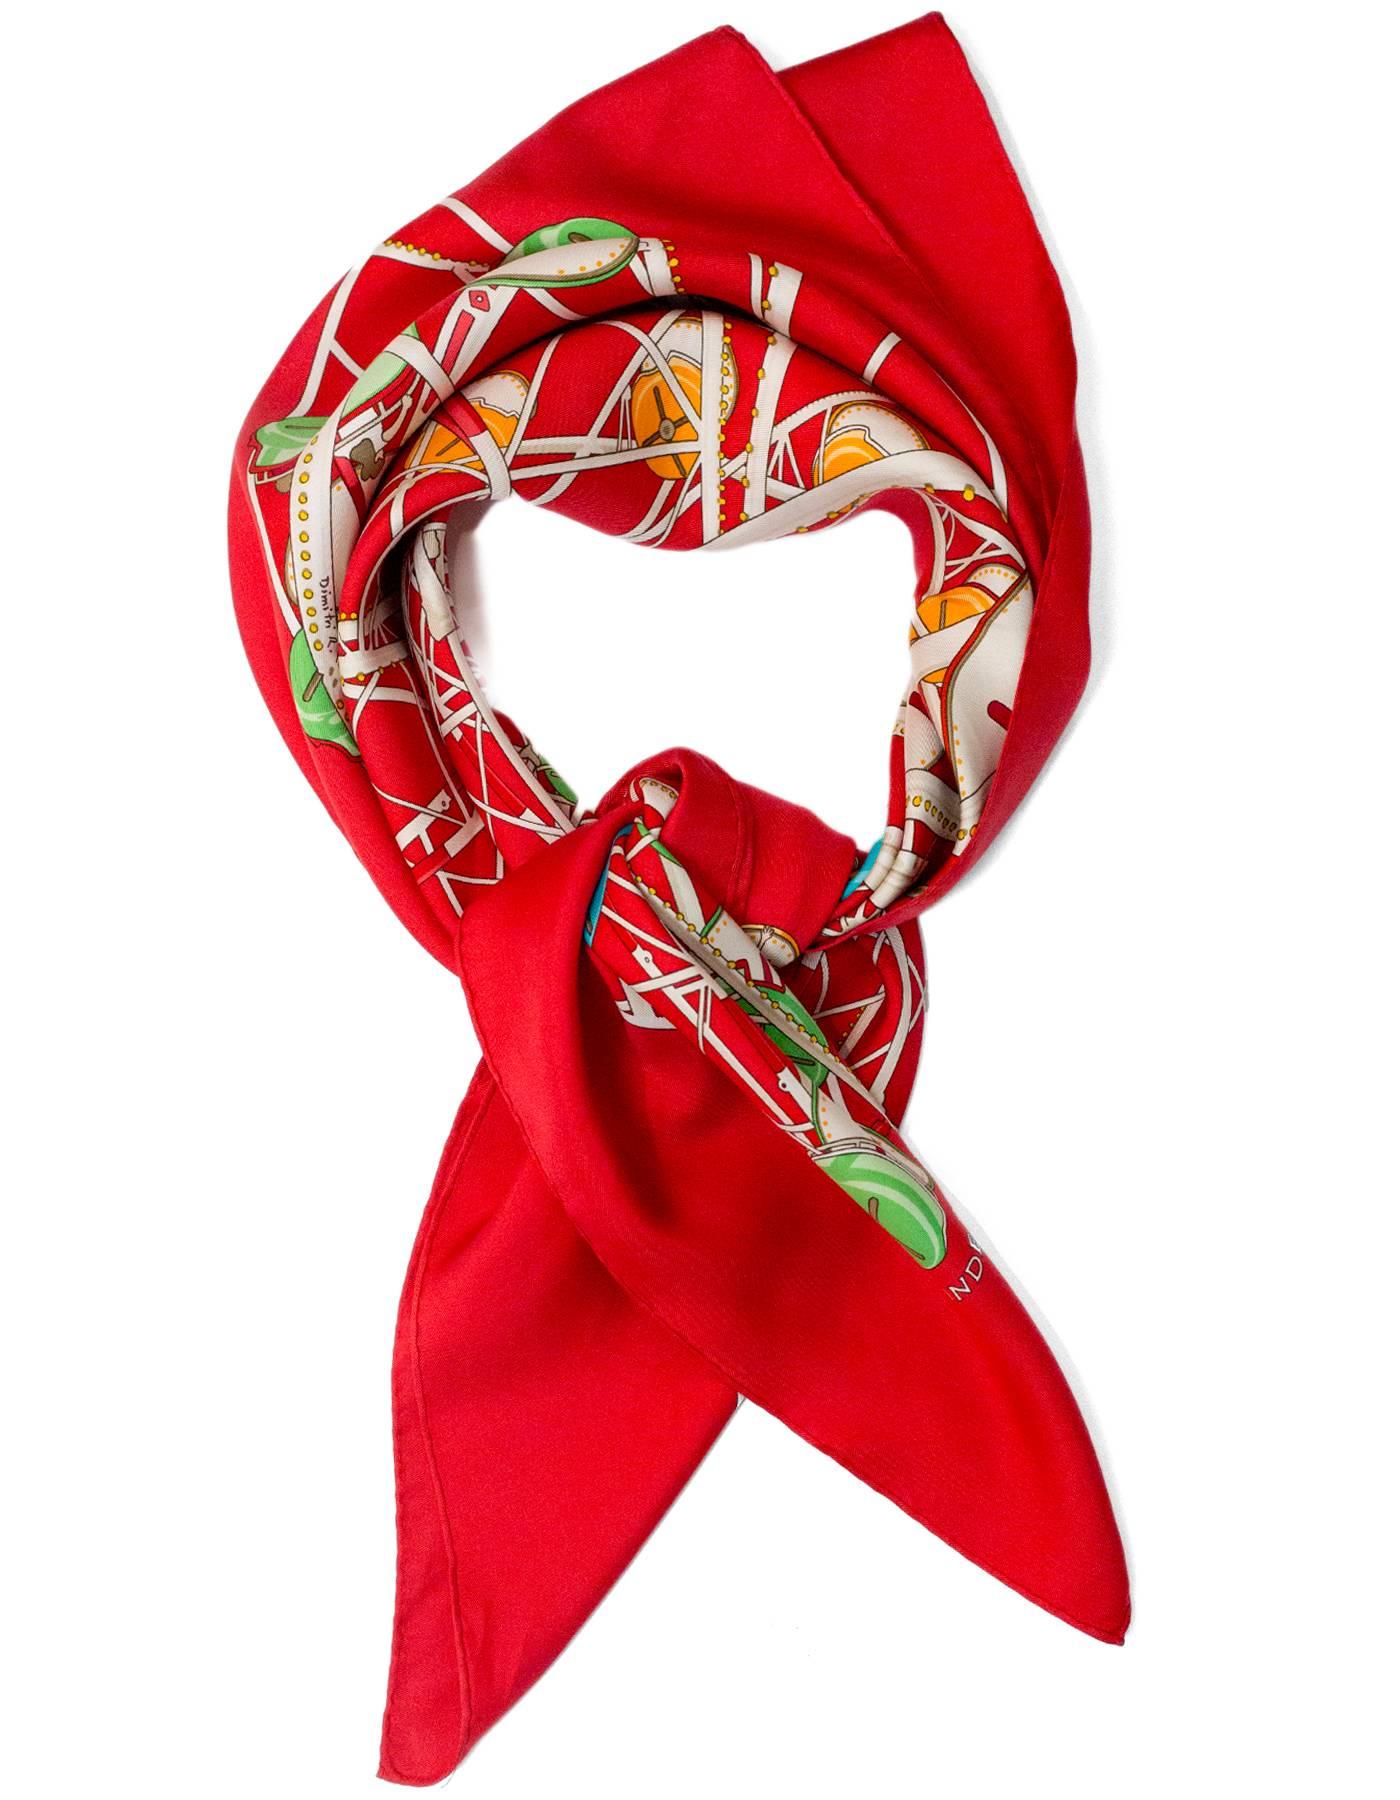 Hermes Red, White & Blue Grand Roue Silk 90cm Scarf

Made In: France
Color: Red, white, blue
Composition: 100% Silk
Retail Price: $395 + tax
Overall Condition: Excellent pre-owned condition

Measurements:
Length: 35"
Width: 35"